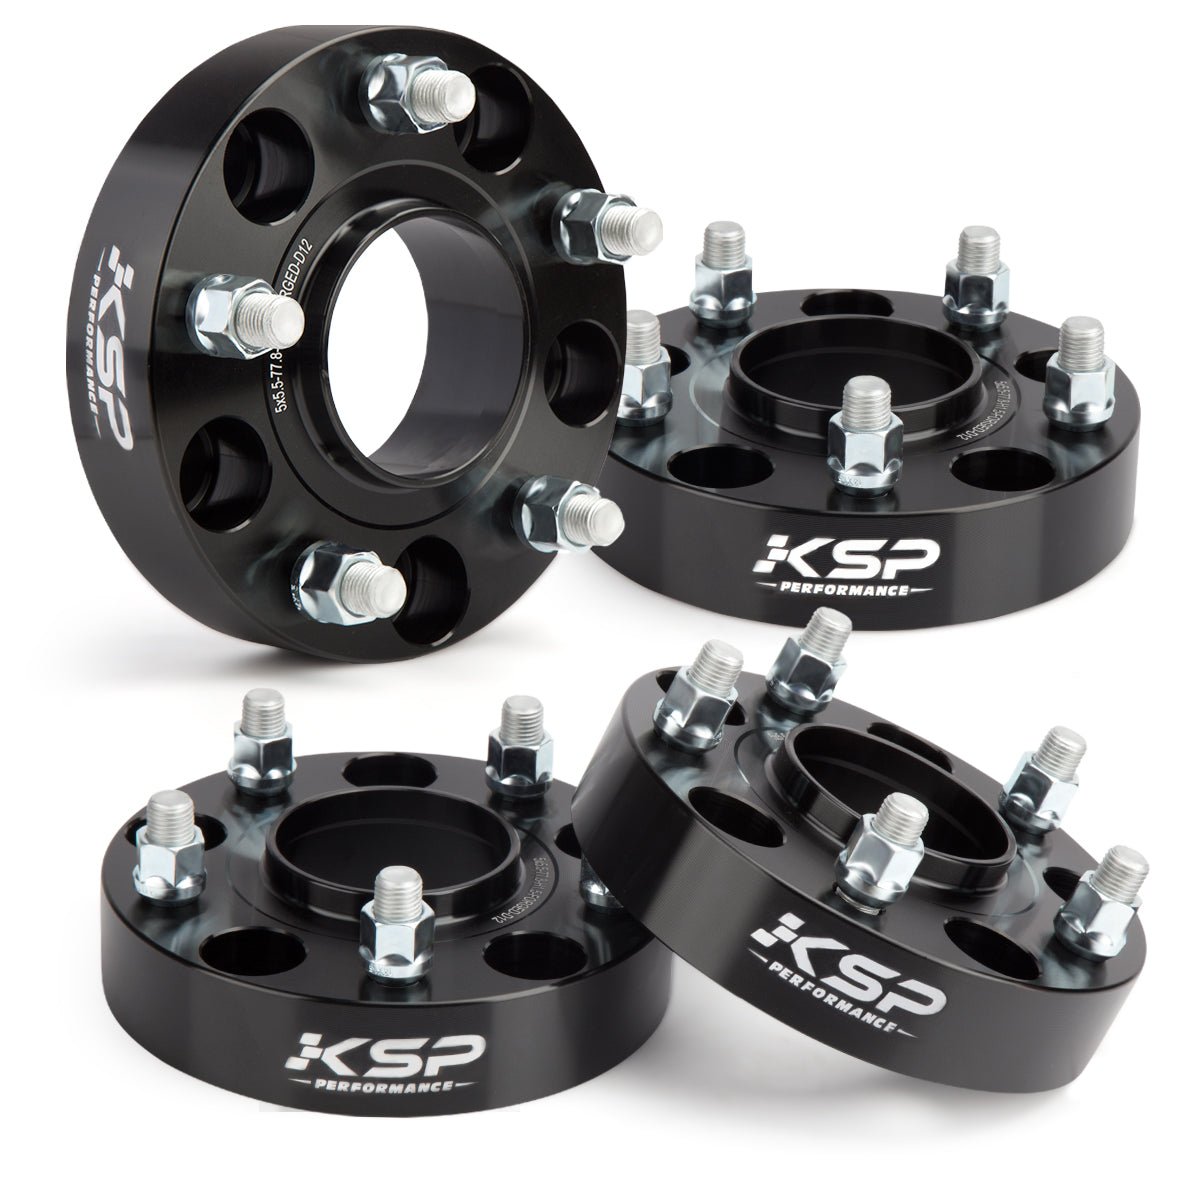 5X5 Hubcentric 2" Wheel Spacers Fit for Jeep JK Grand Cherokee Commander xccscss.